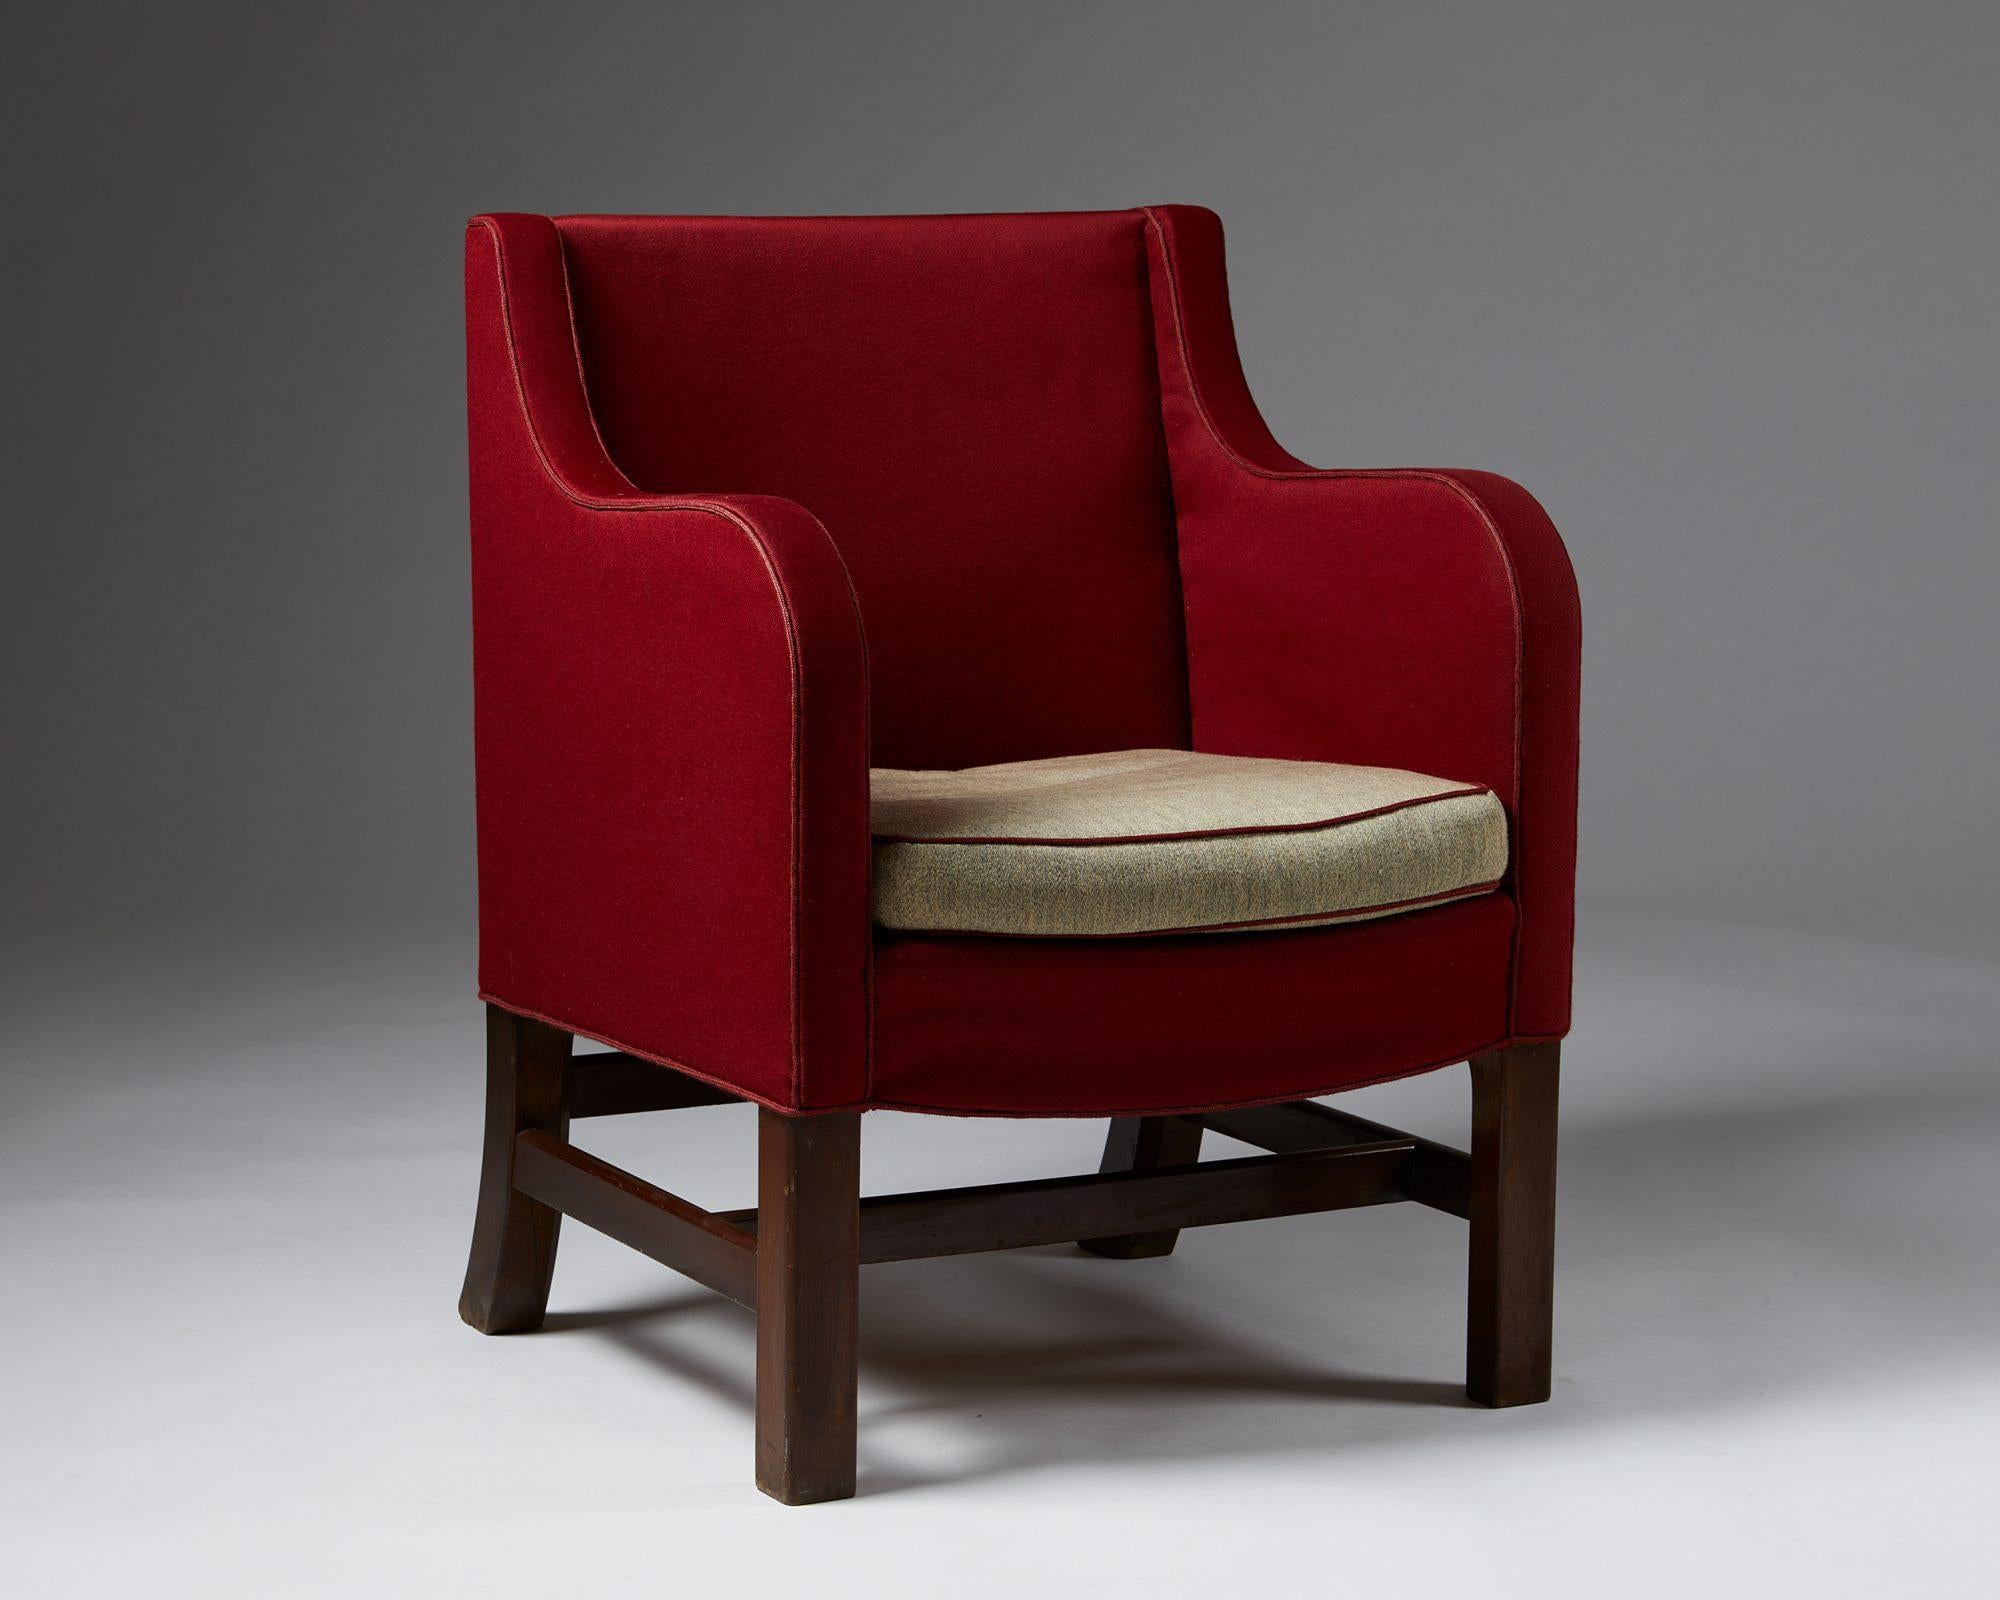 Mahogany and wool upholstery.

Measures: H: 82 cm/ 2' 8 1/4